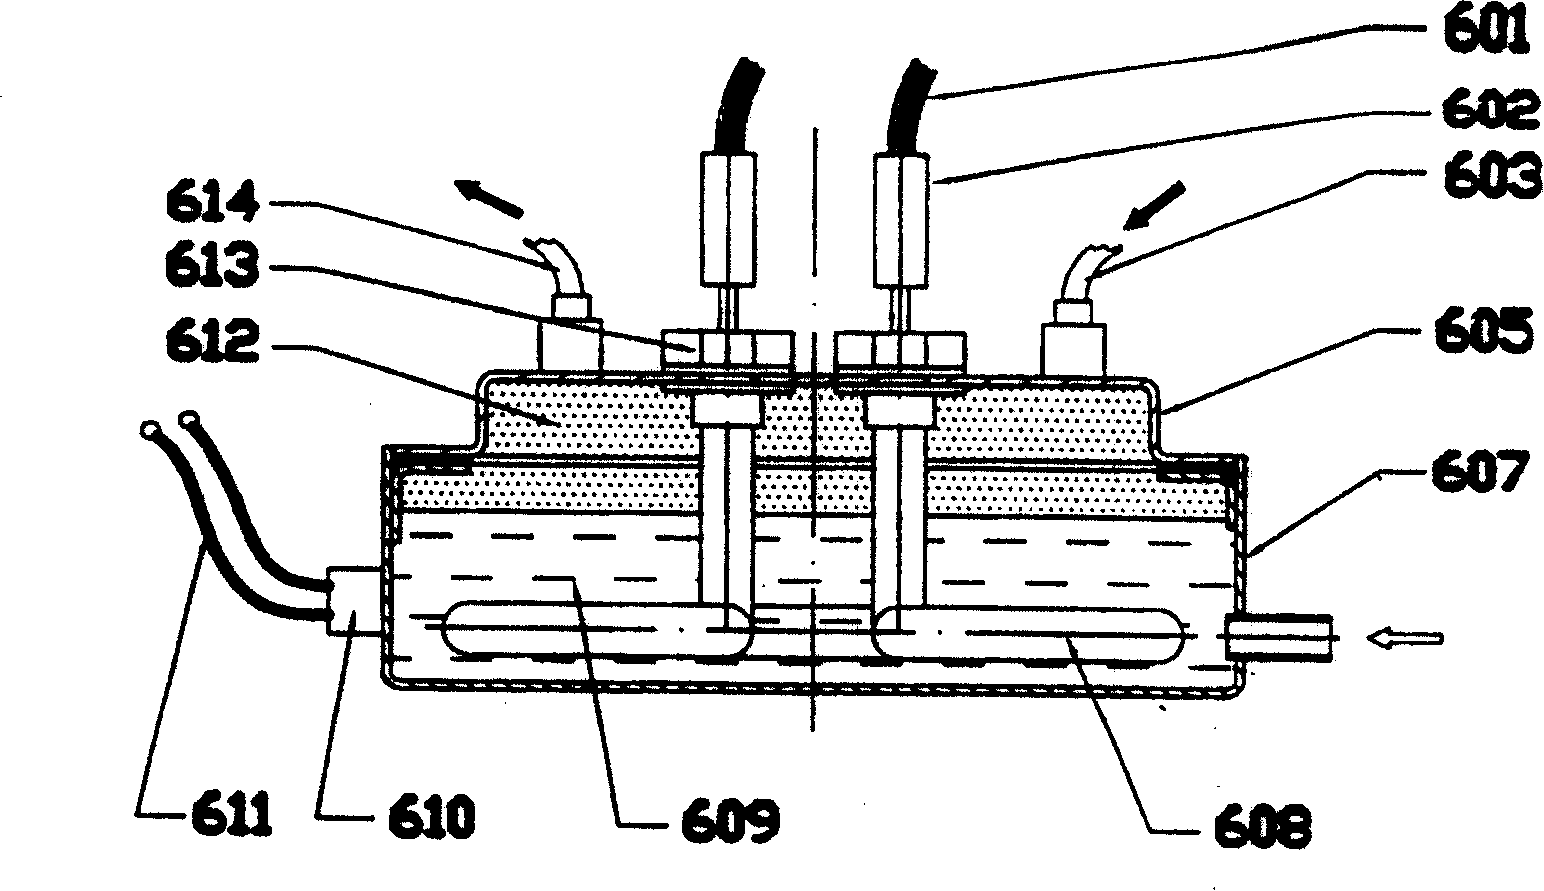 Automatic lubrication system for shaft of rotating shuttle in many-headed computer embroidery machine